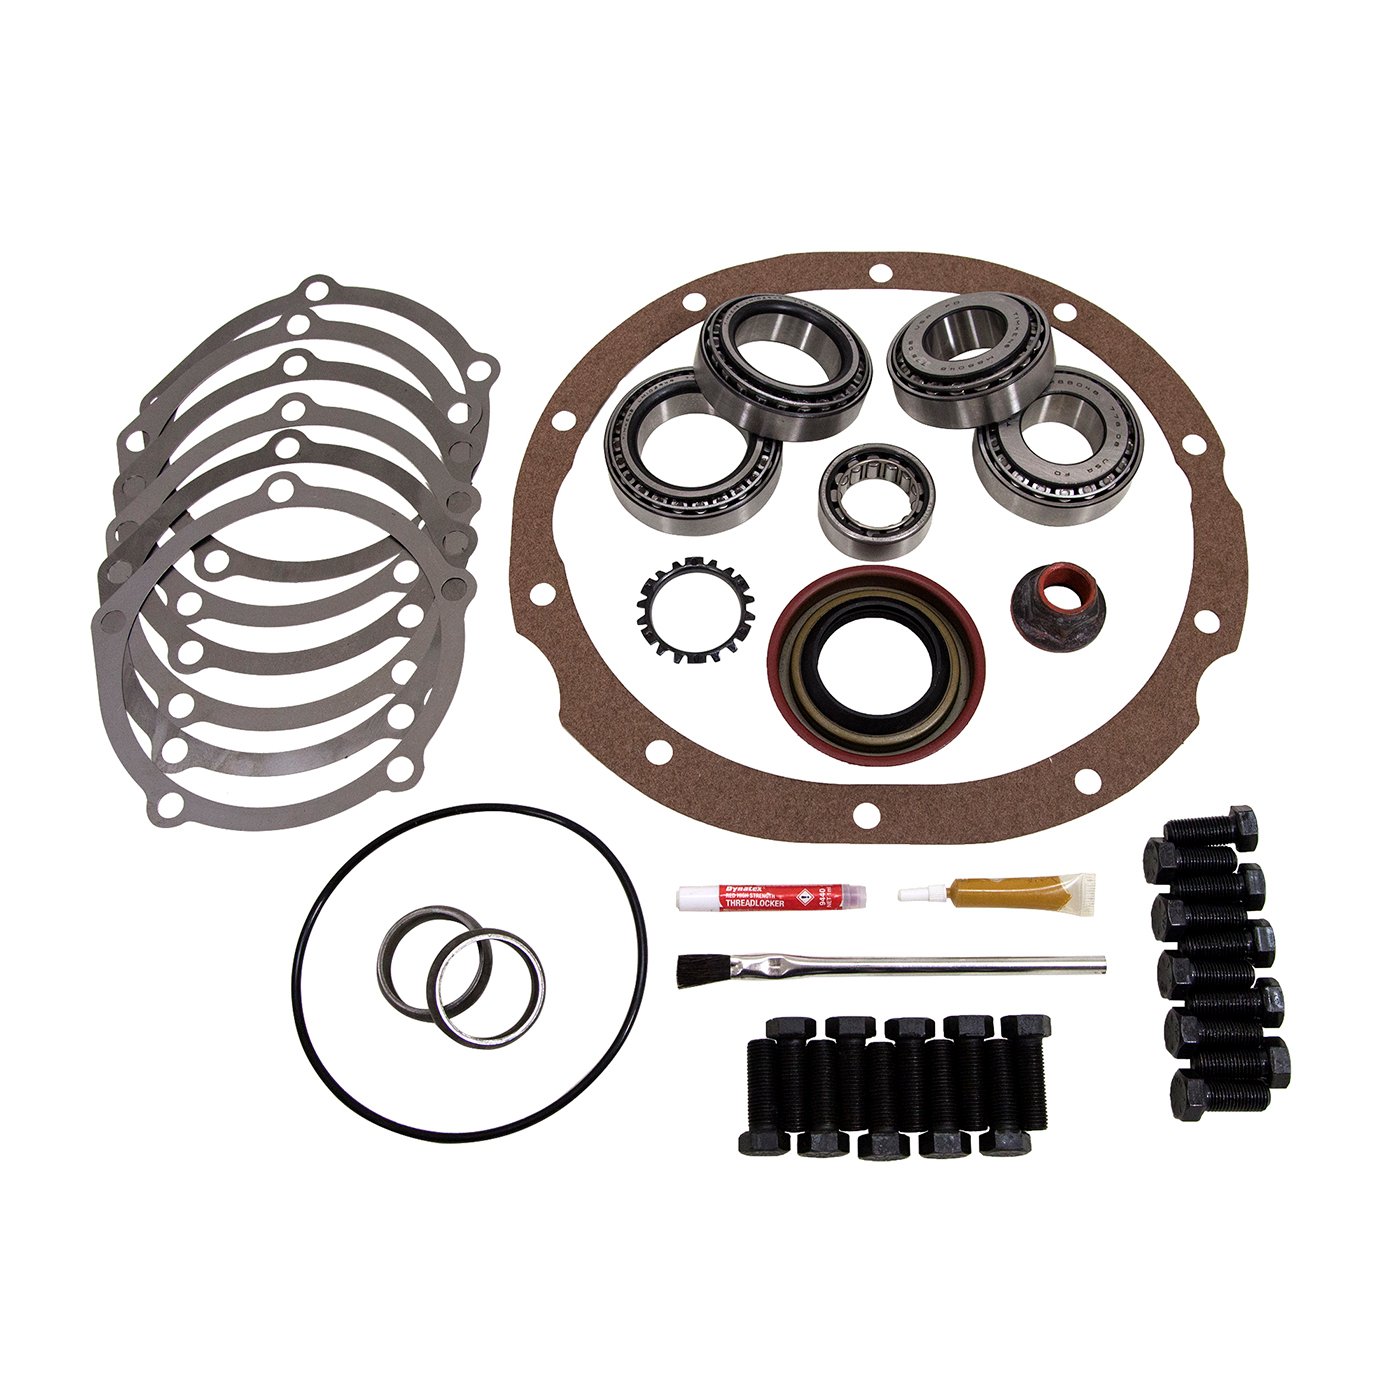 USA Standard ZK F9-HDC Master Overhaul Kit, For d 9 in. Lm603011 Diff W/Daytona Pinion Support